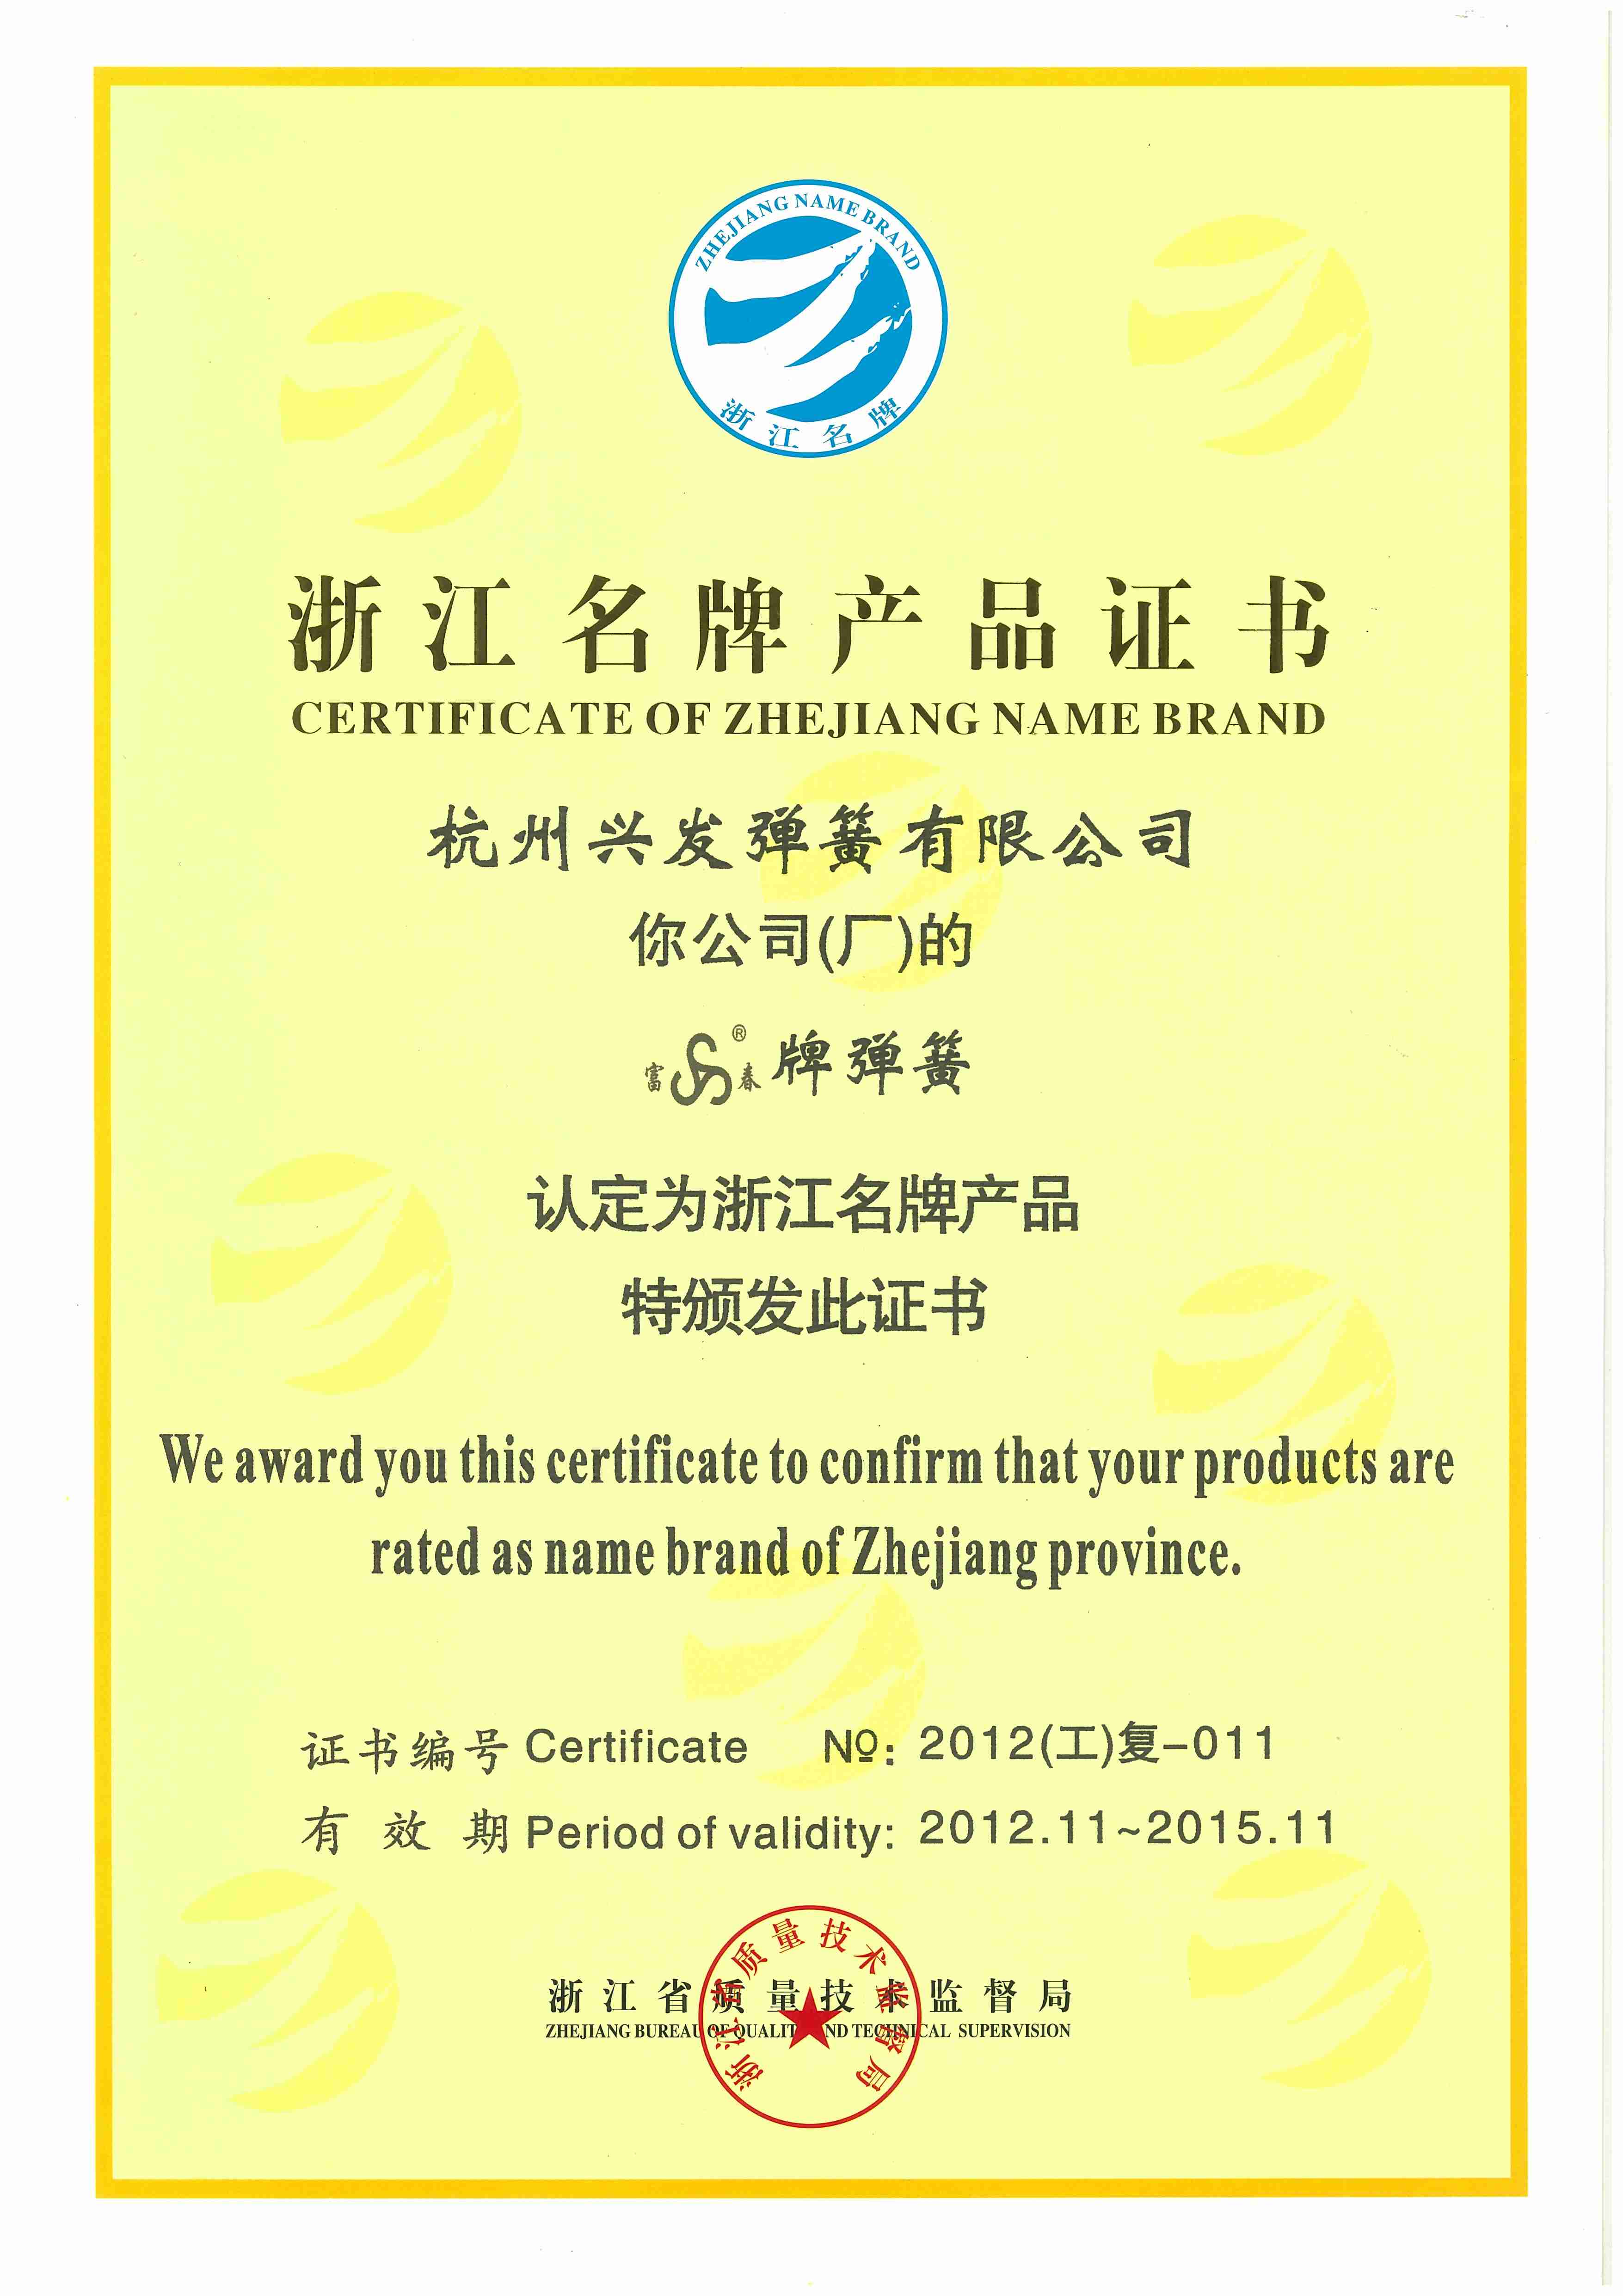 Famous Brand Products in Zhejiang Province